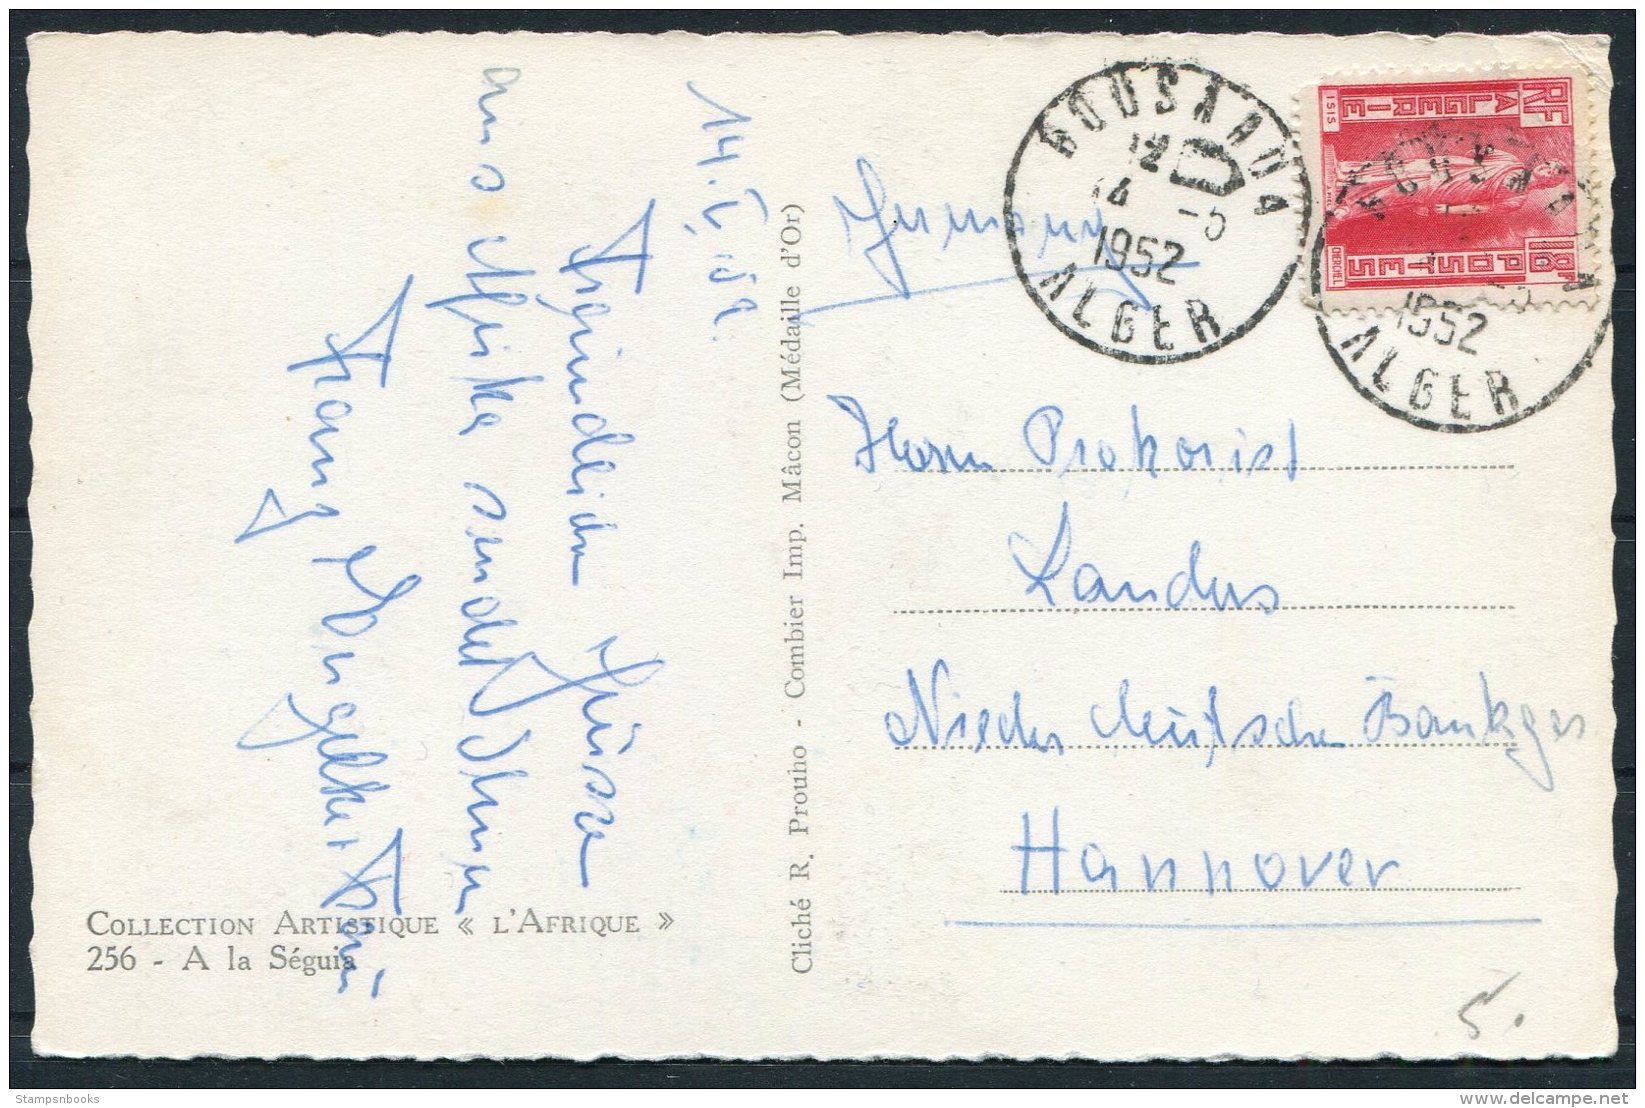 1952 Algeria Postcad - Hannover Germany - Covers & Documents